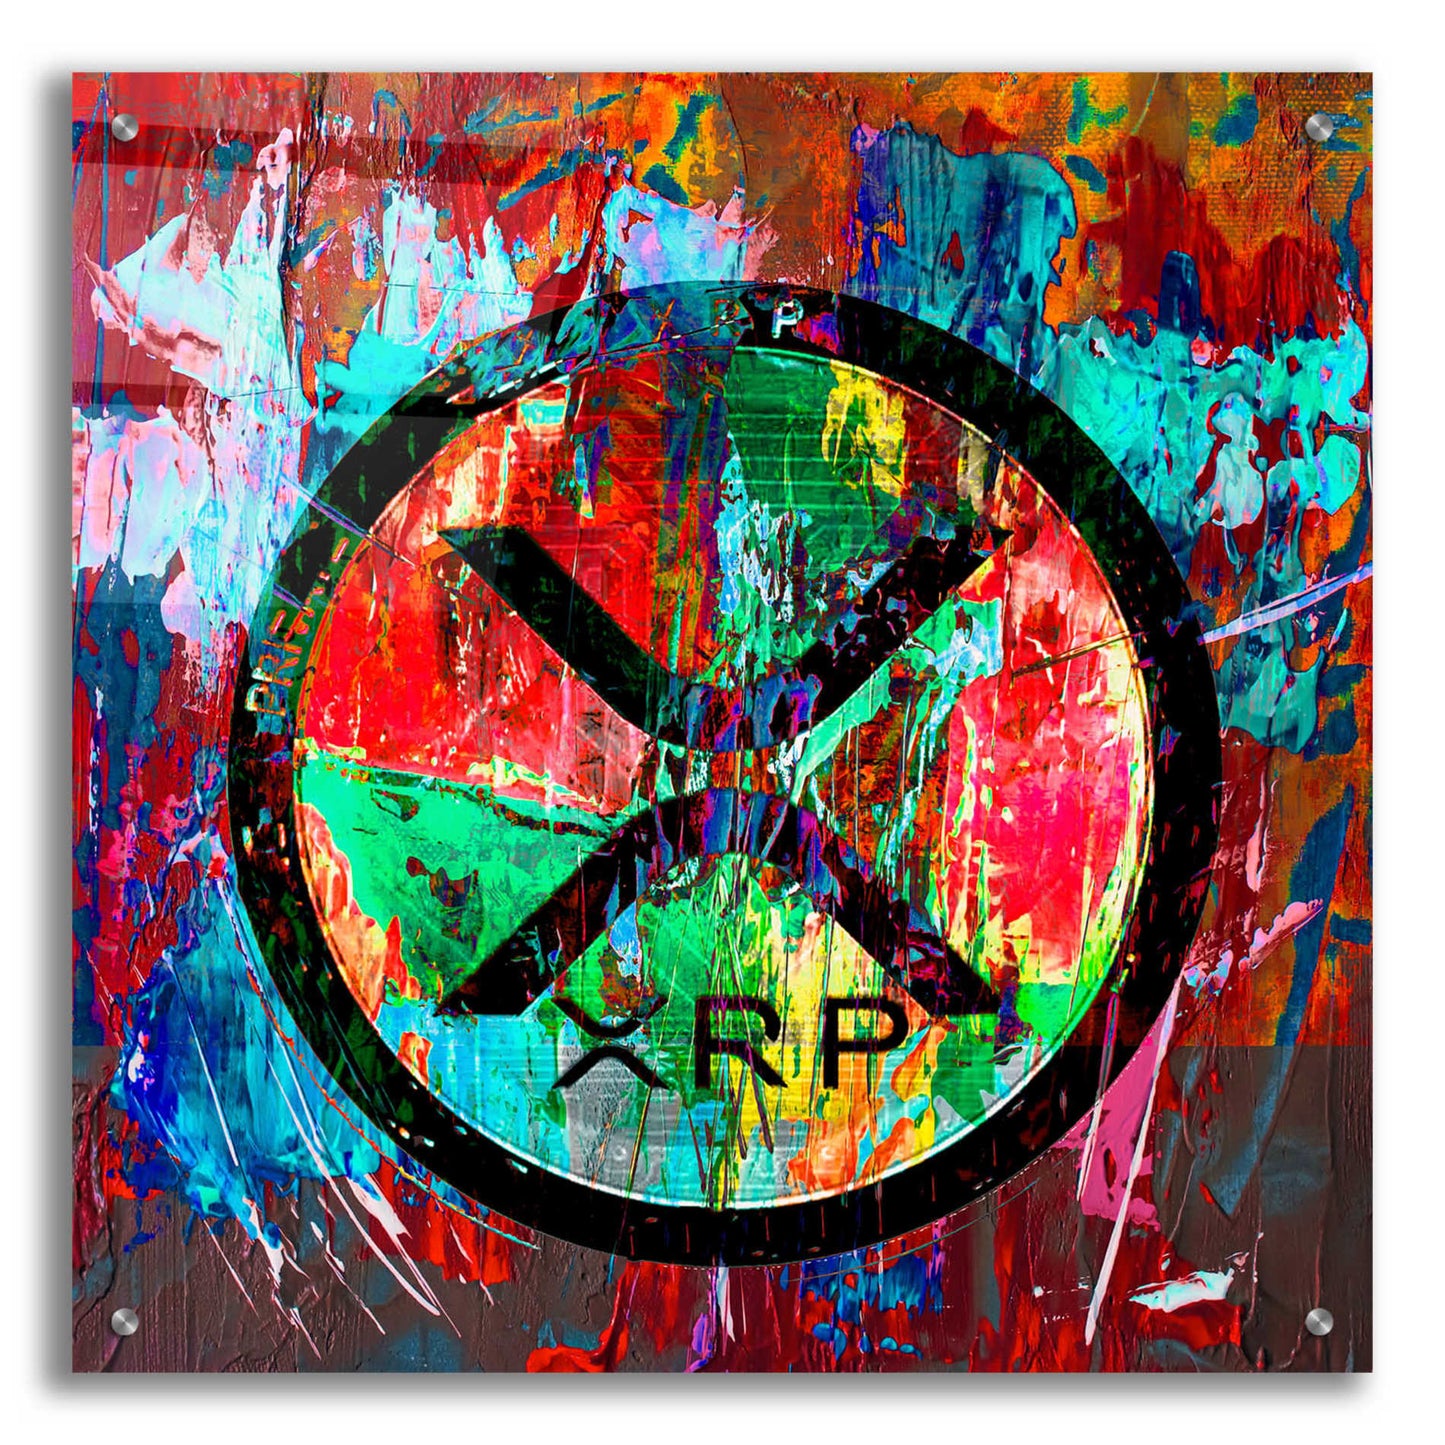 Epic Art 'Xrp Crypto In Color' by Epic Art Portfolio, Acrylic Glass Wall Art,24x24